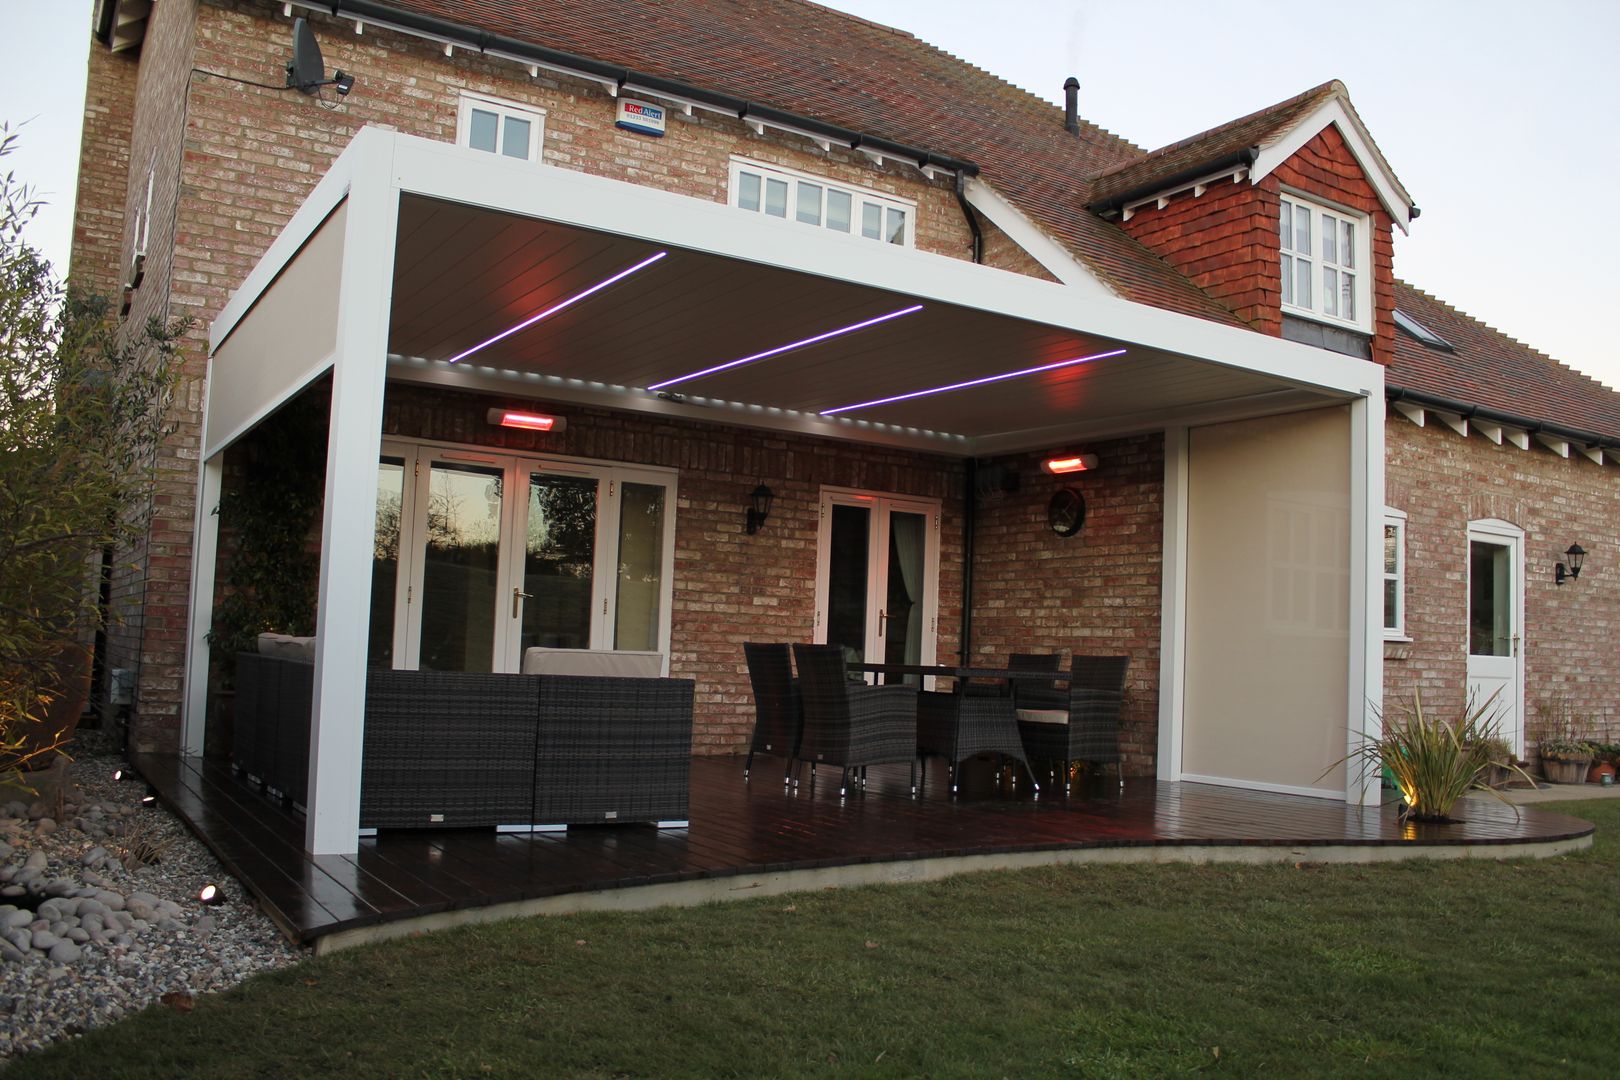 Outdoor Living Pod, Louvered Roof Patio Canopy Installation in Kent. homify Modern garden outdoor living pod,louvered,roof,patio,terrace,canopy,garden,room